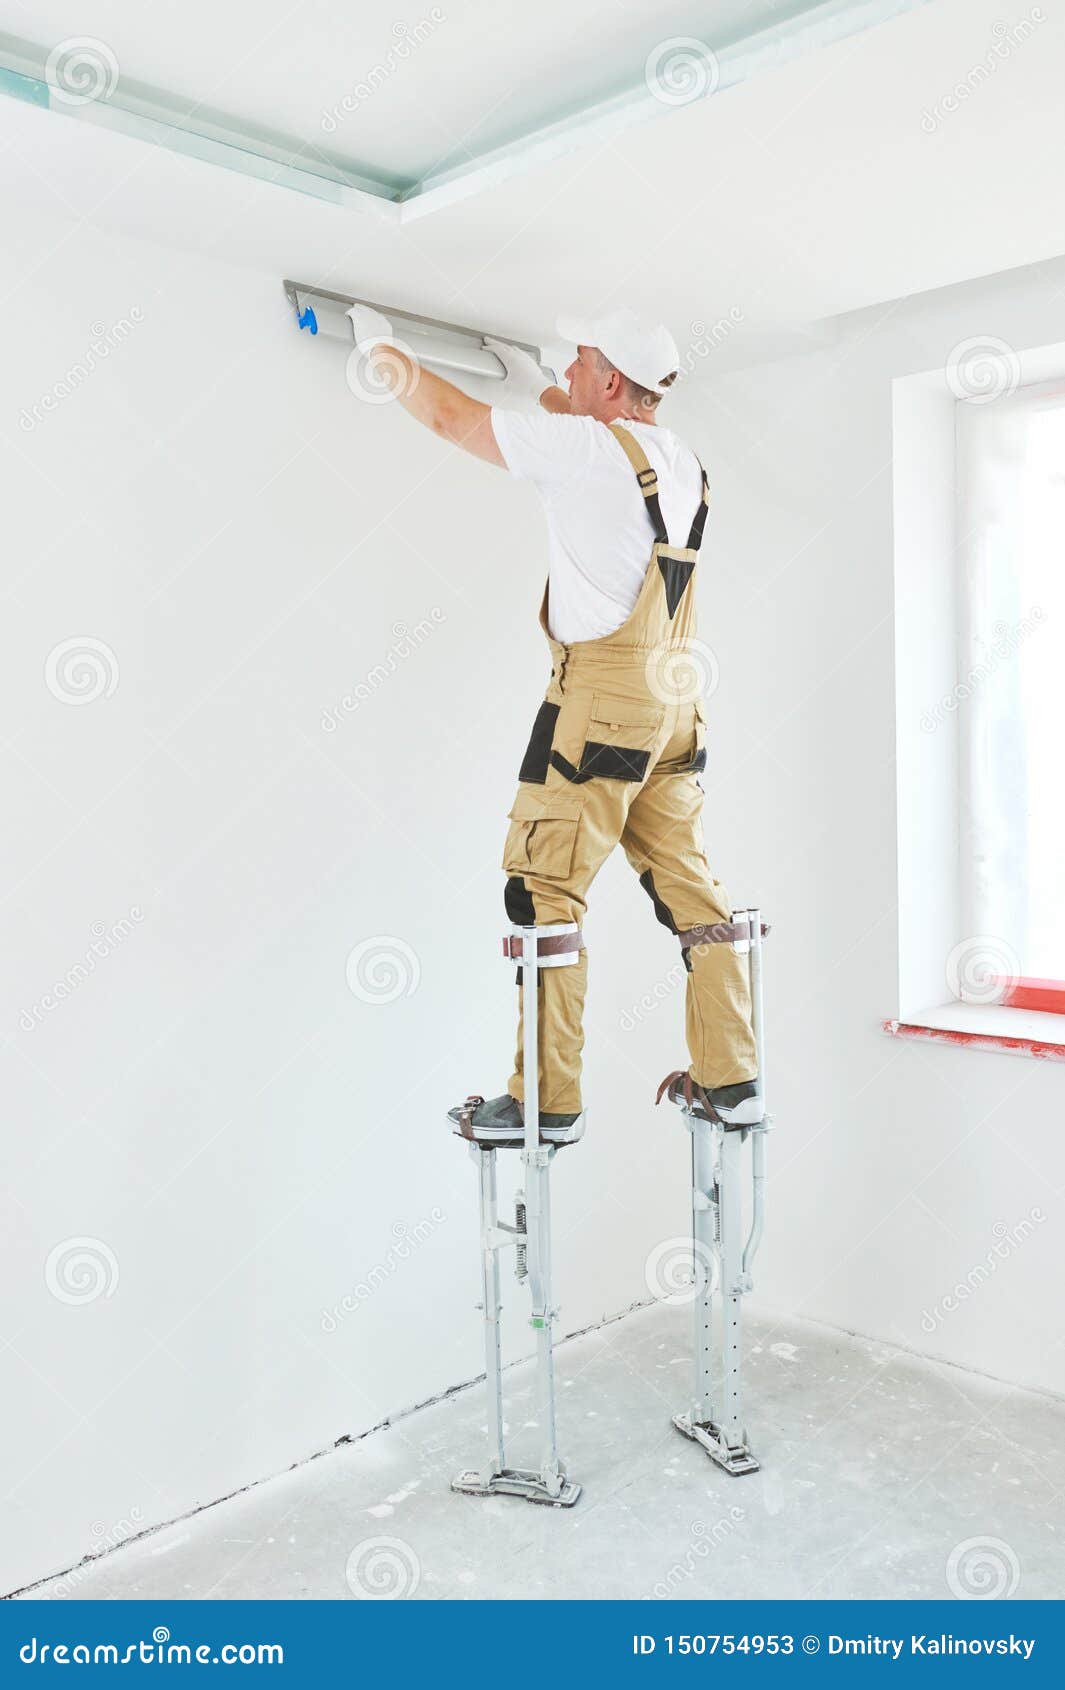 Painter In Stilts With Putty Knife Plasterer Smoothing Ceiling